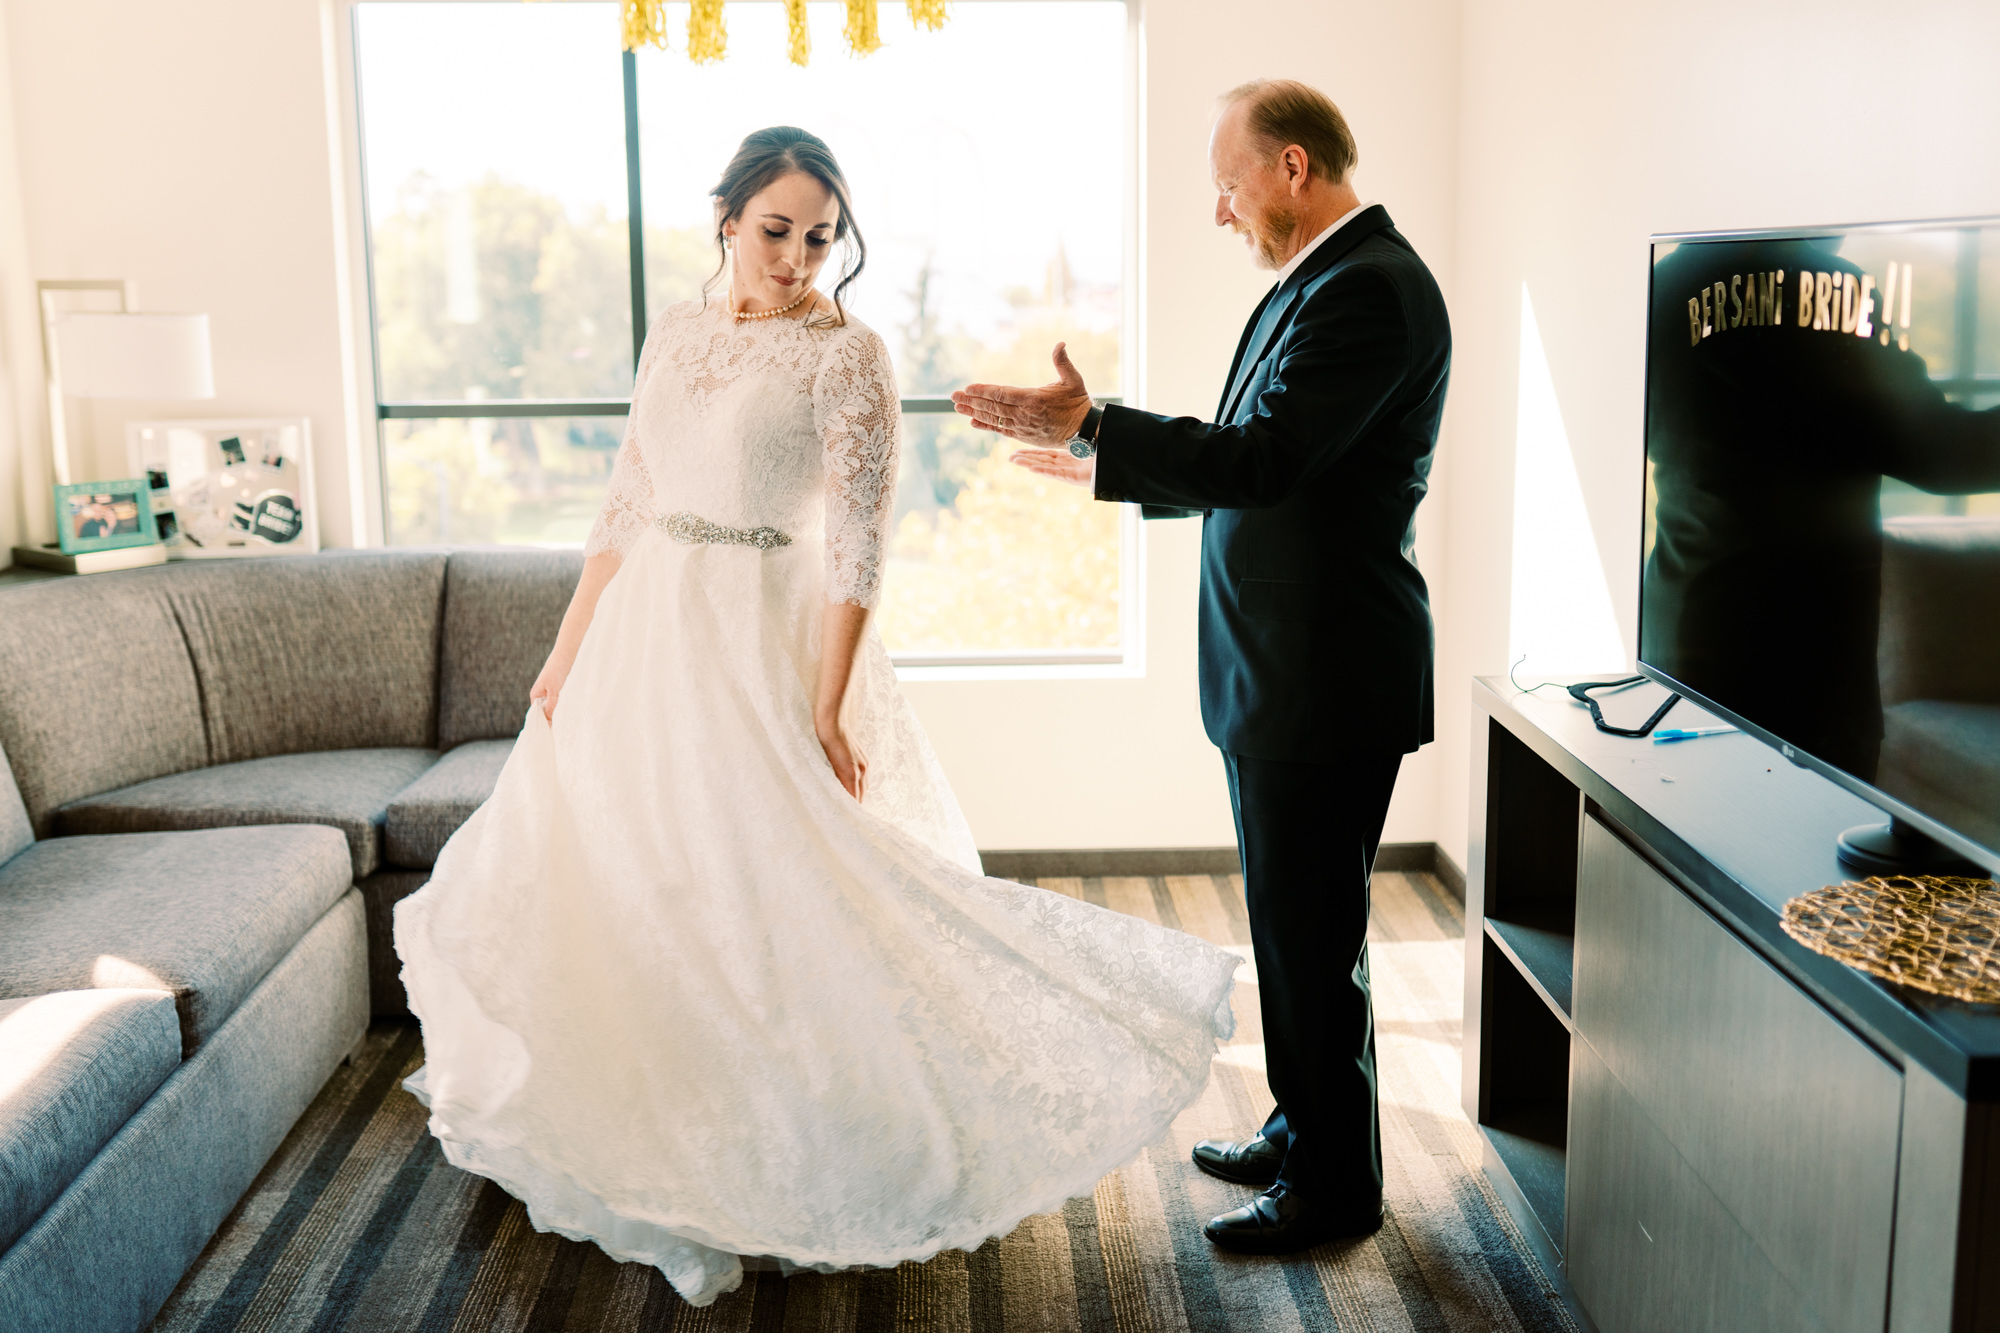 Father of the bride admires his daughter in her wedding gown